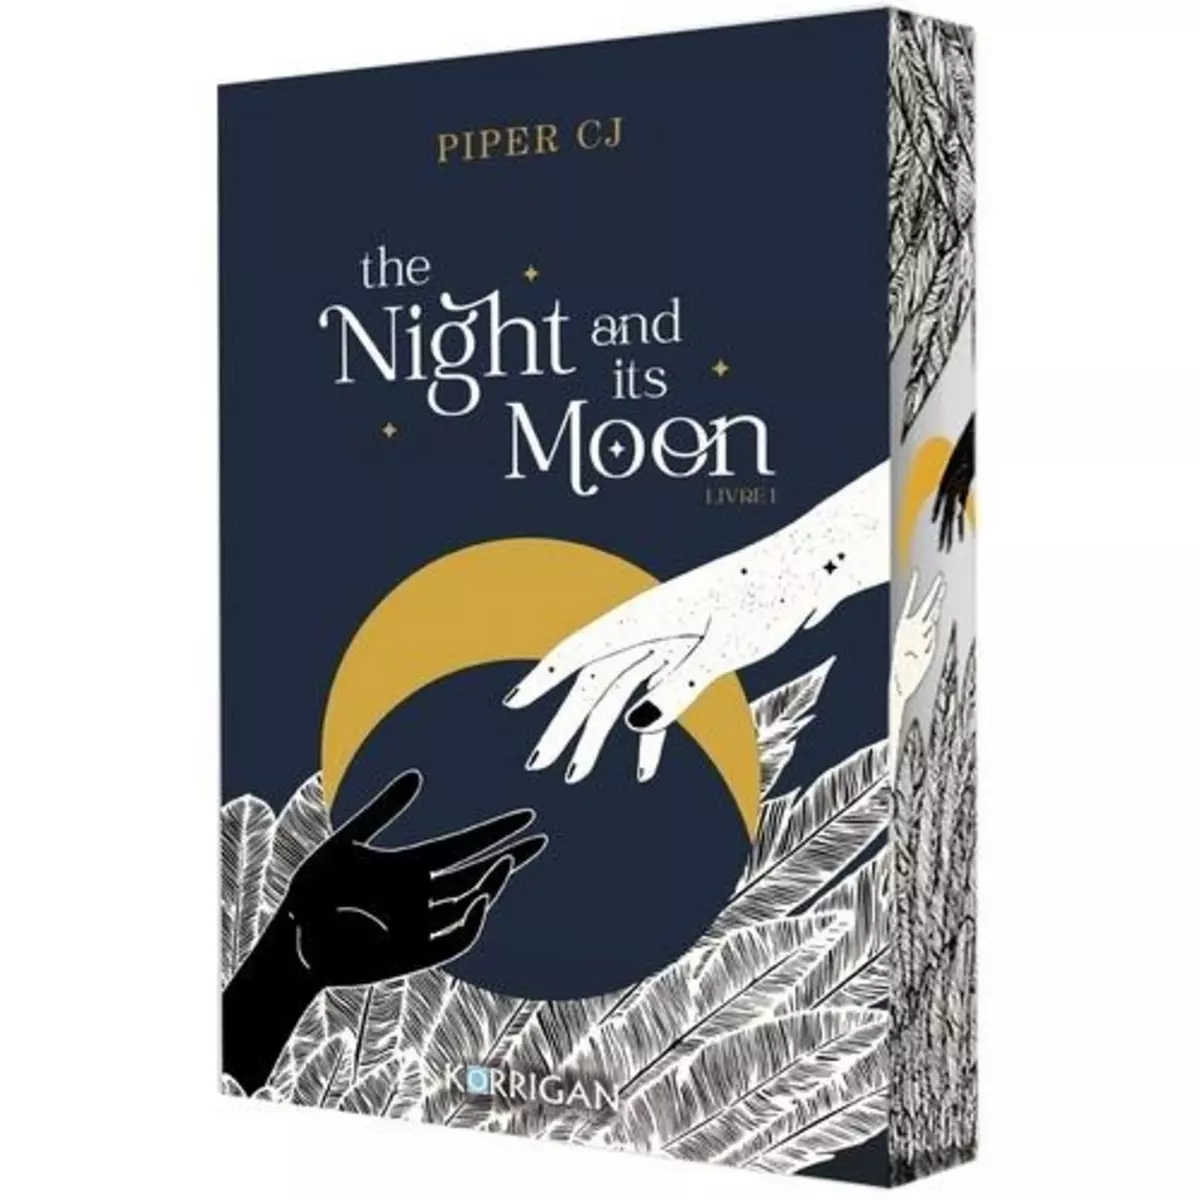  THE NIGHT AND ITS MOON TOME 1 . EDITION COLLECTOR, Piper CJ